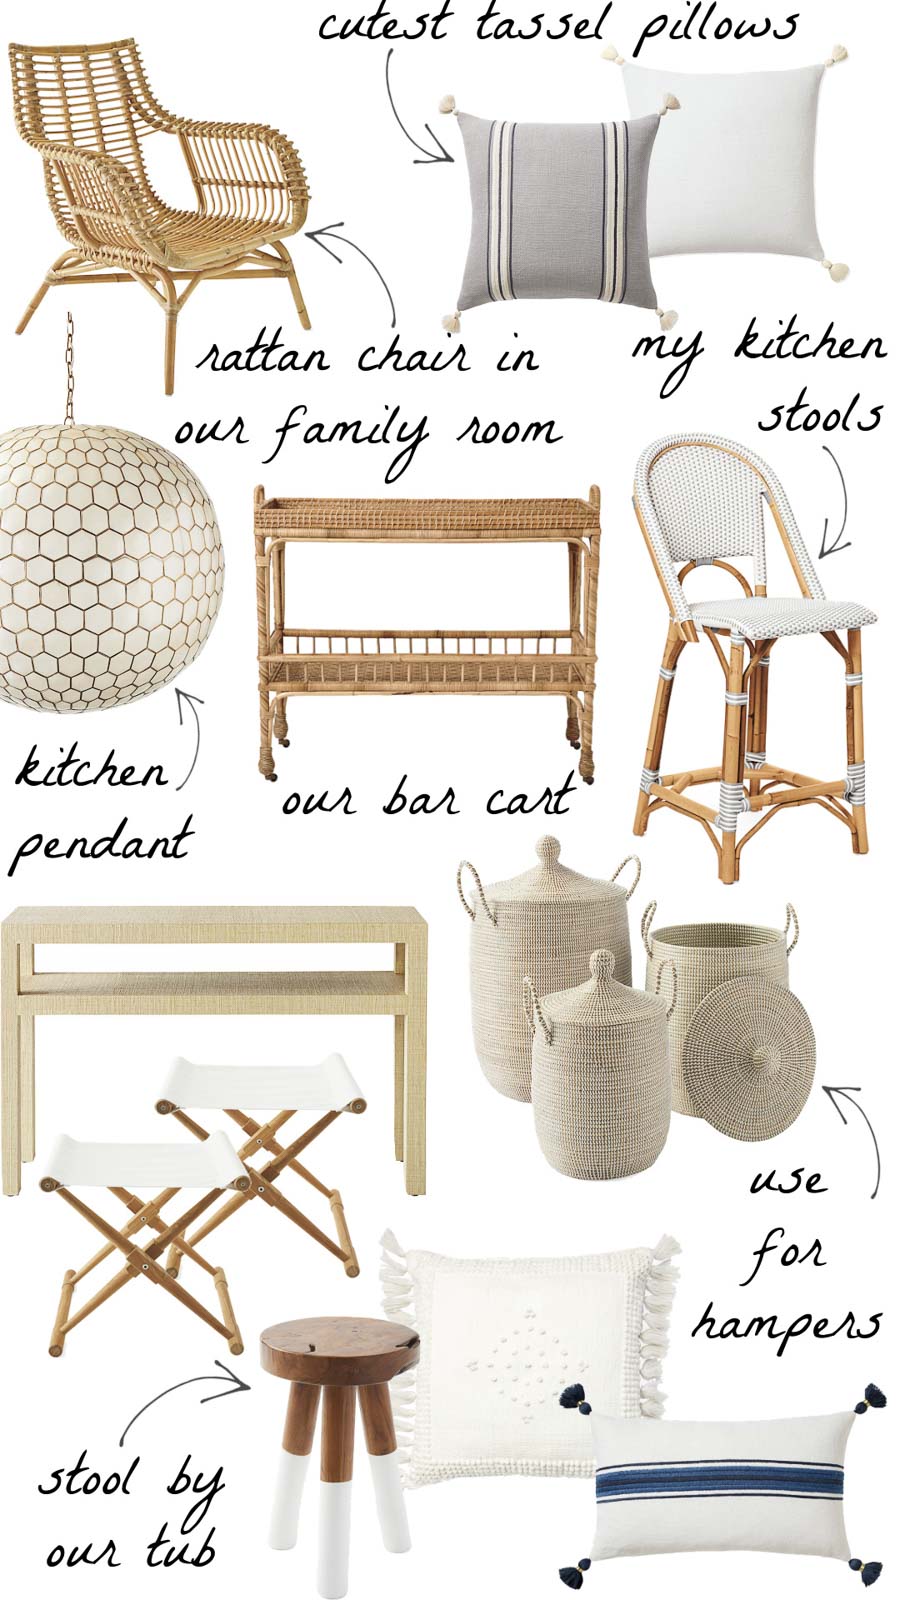 Serena & Lily sale favorites from our home!